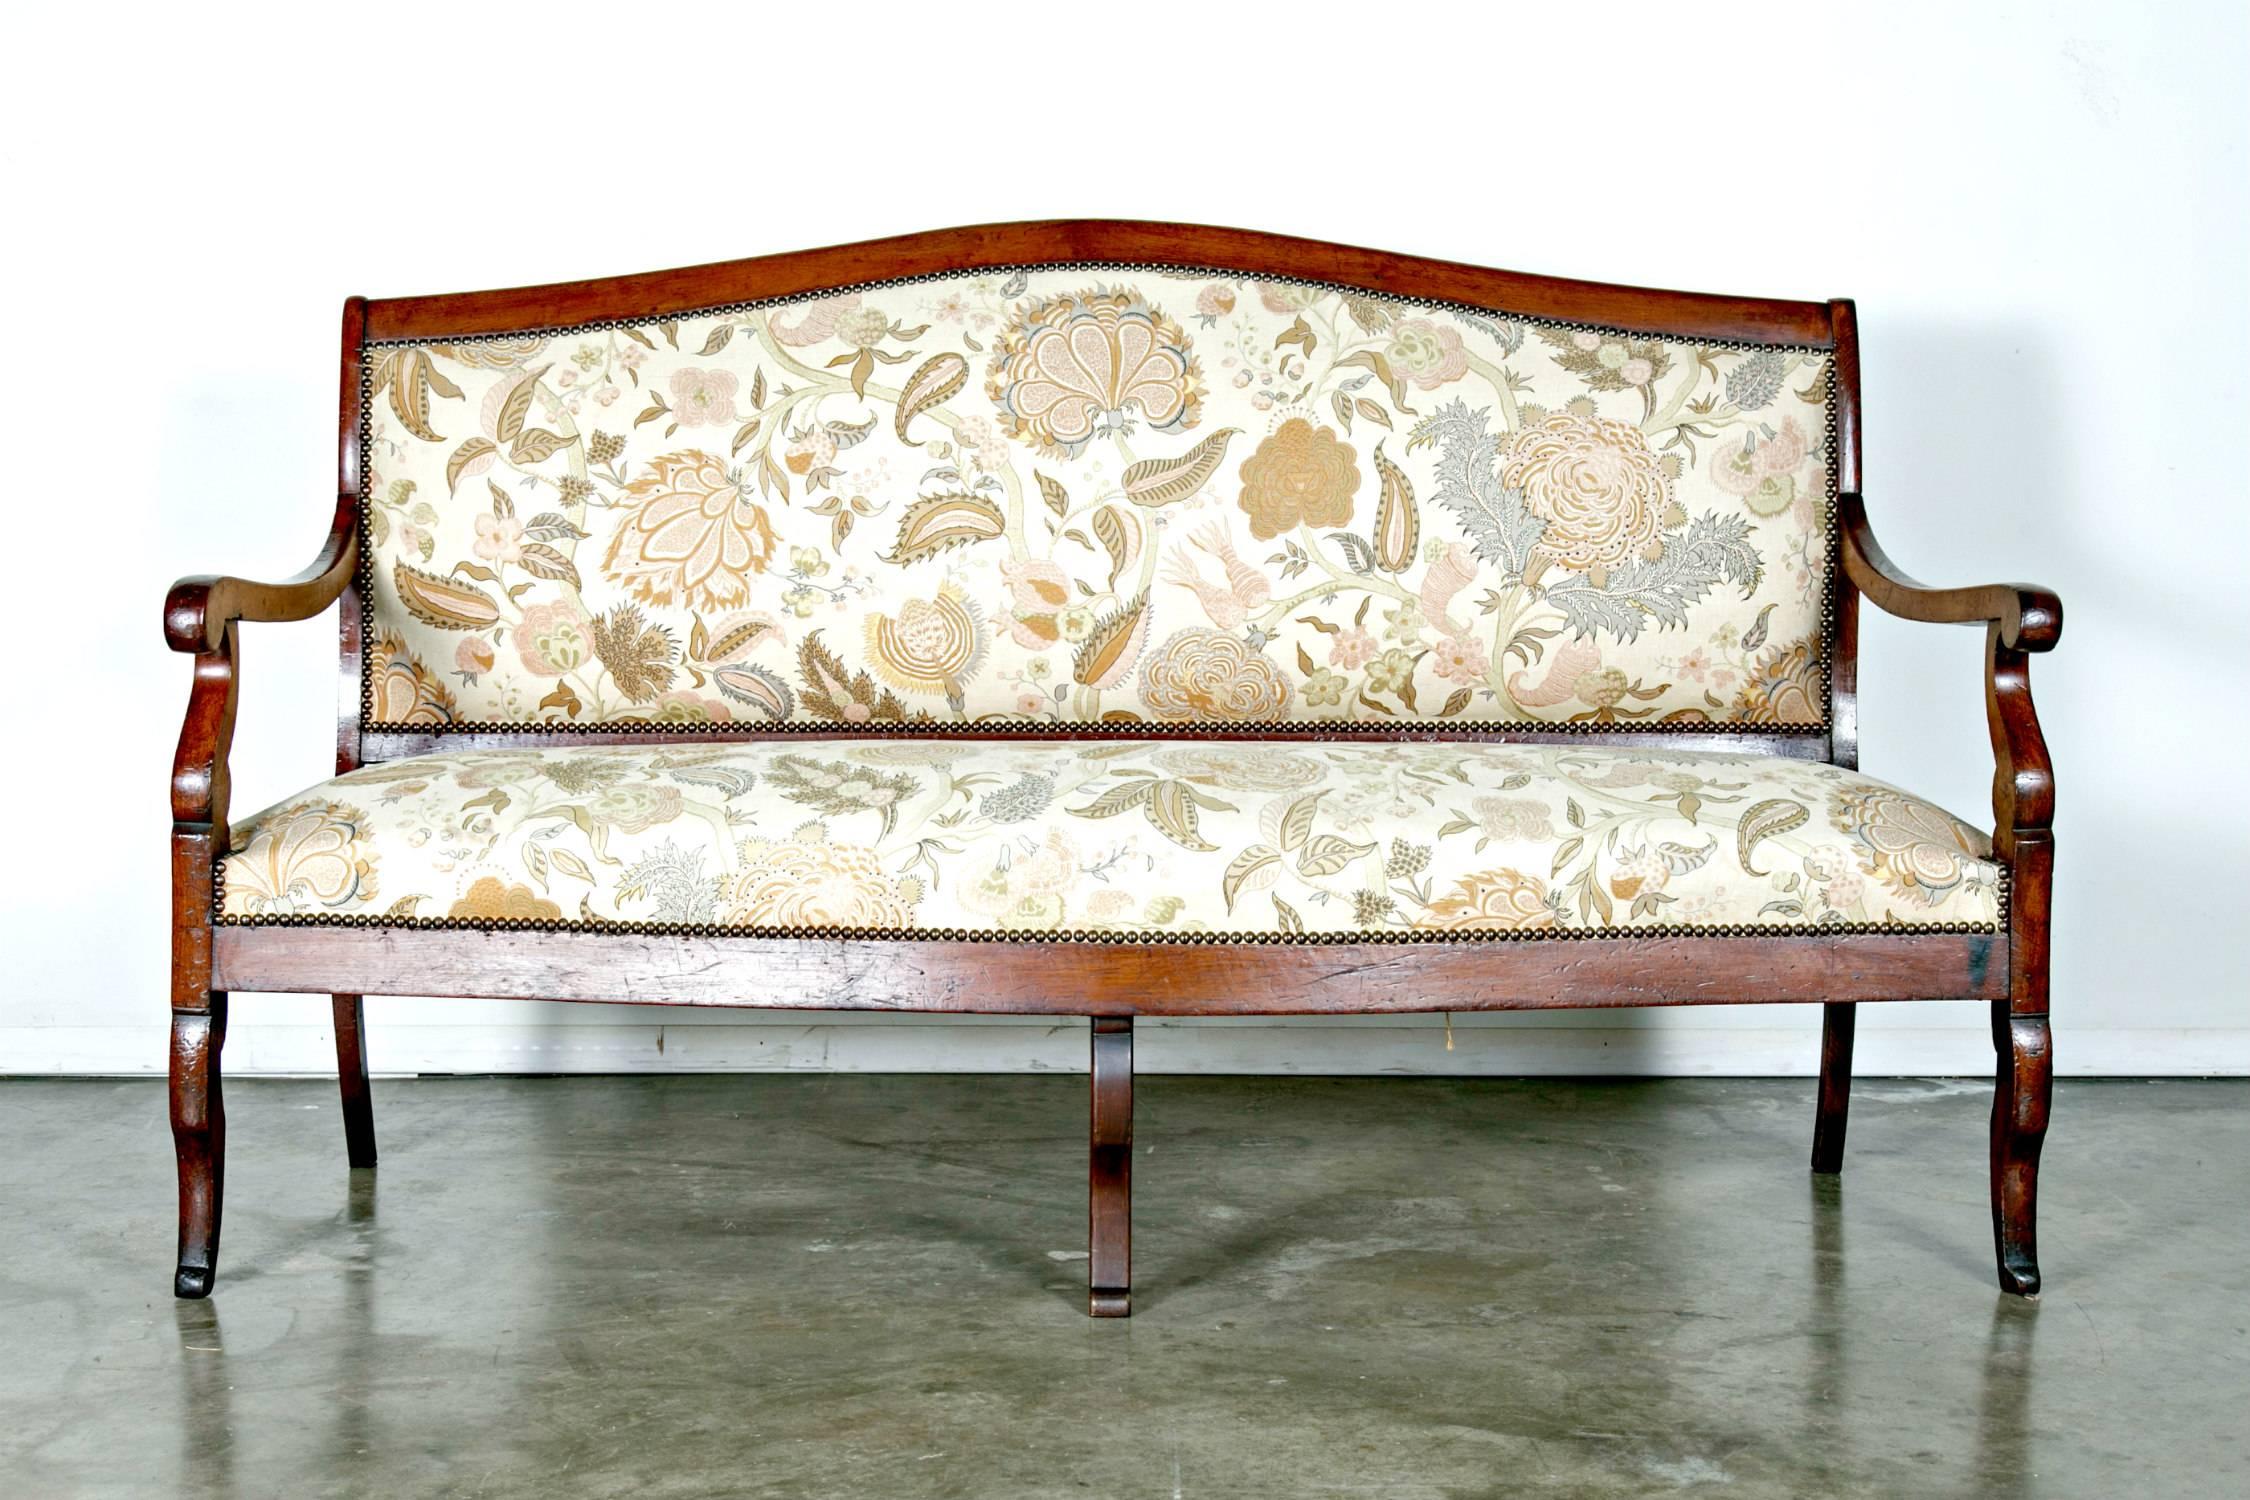 19th century French Restauration period sofa of solid, polished walnut having scrolled arms and upholstered back with show-wood. Very sturdy and comfortable seating.

Dimensions:
back height 40.25 inches,
seat height 18 inches,
arm height 26